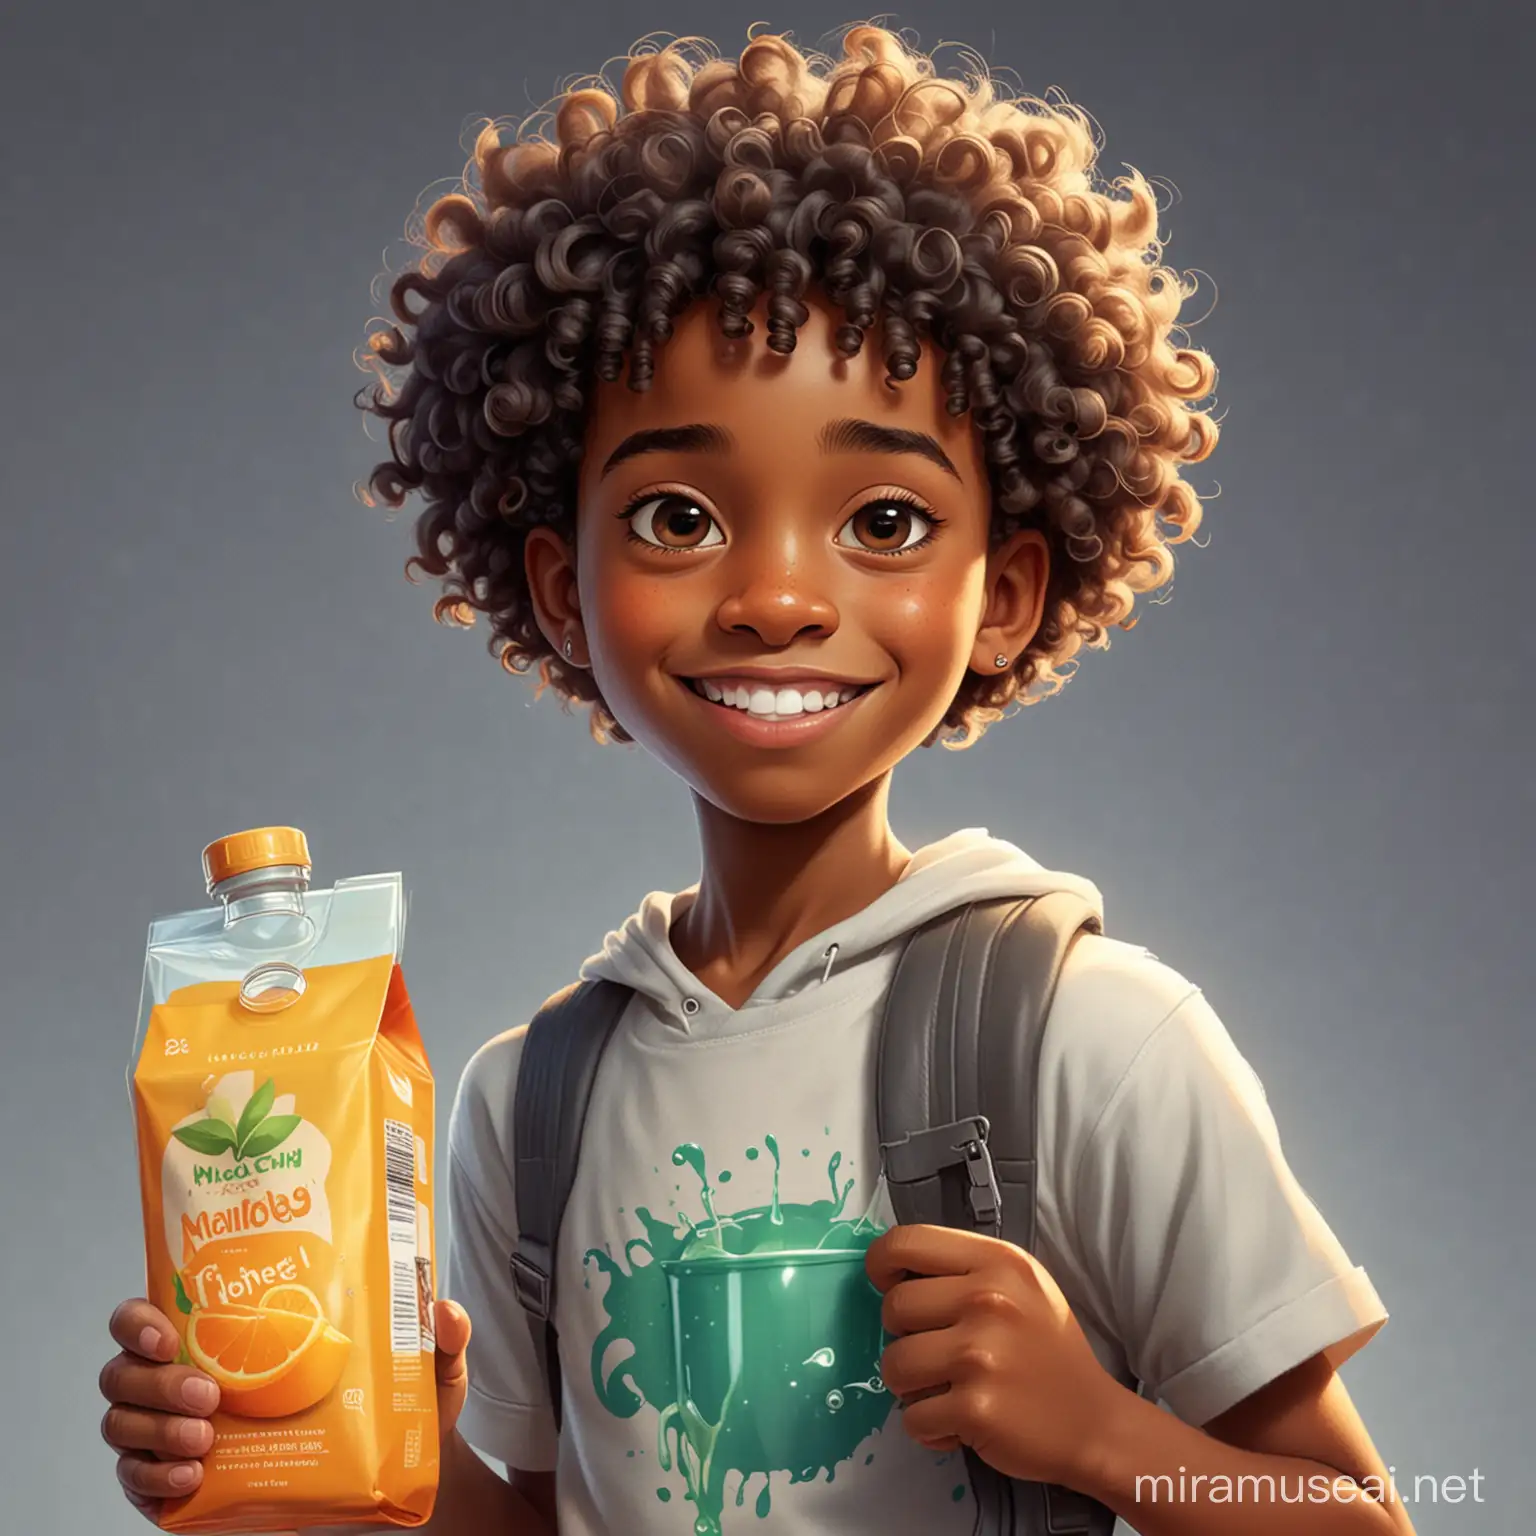 A cartoon picture of a 12-year-old black boy holding a bag and juice with long curly hair